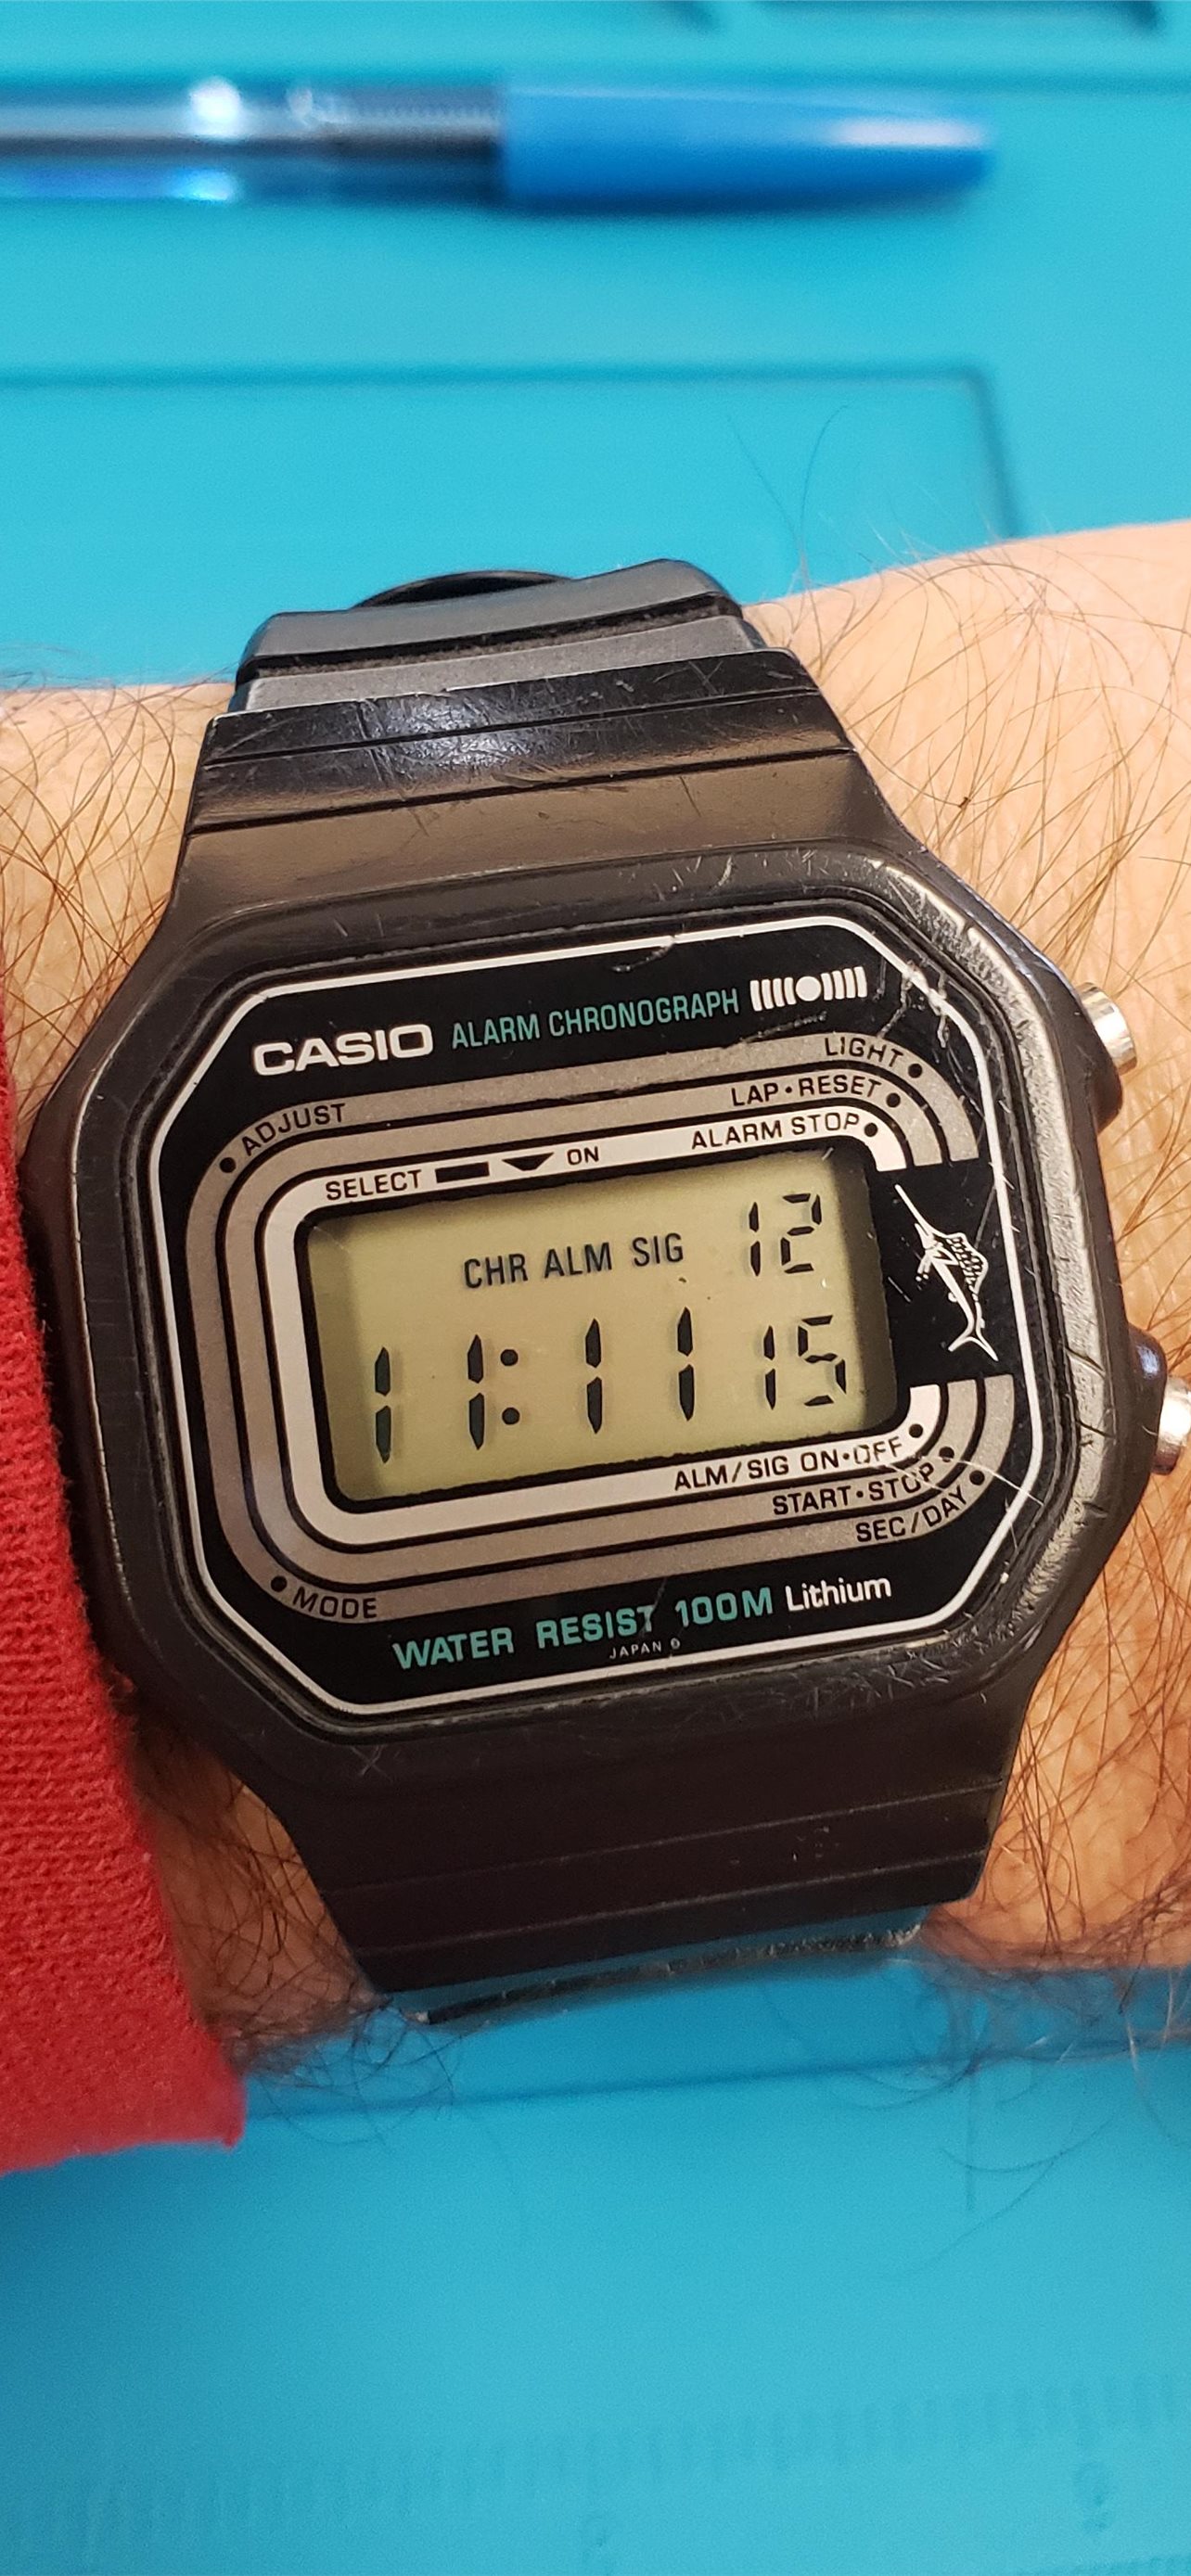 What a Casio watch has to do with Shakira and Gerard Piqués break up   British GQ